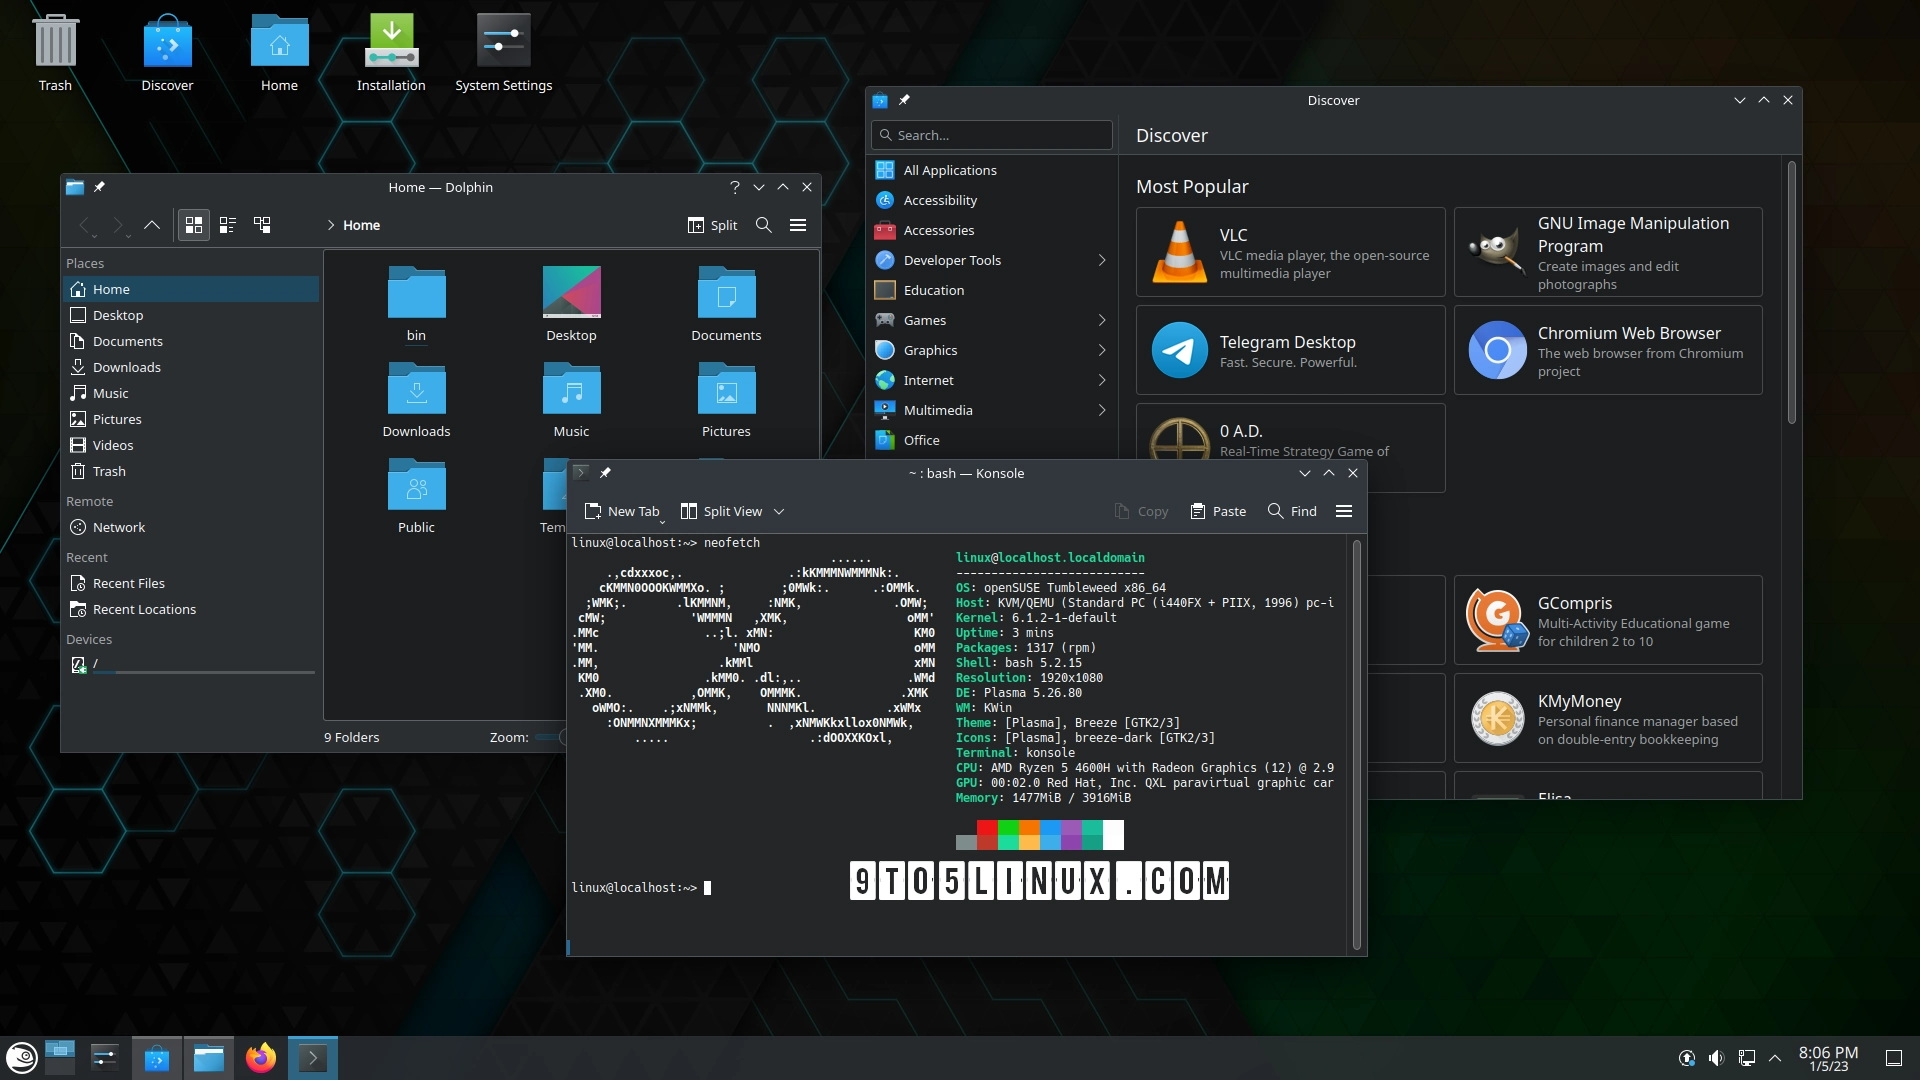 KDE Gear 22.12.1 Brings Improvements to Dolphin, Konsole, Kdenlive, and Other Apps